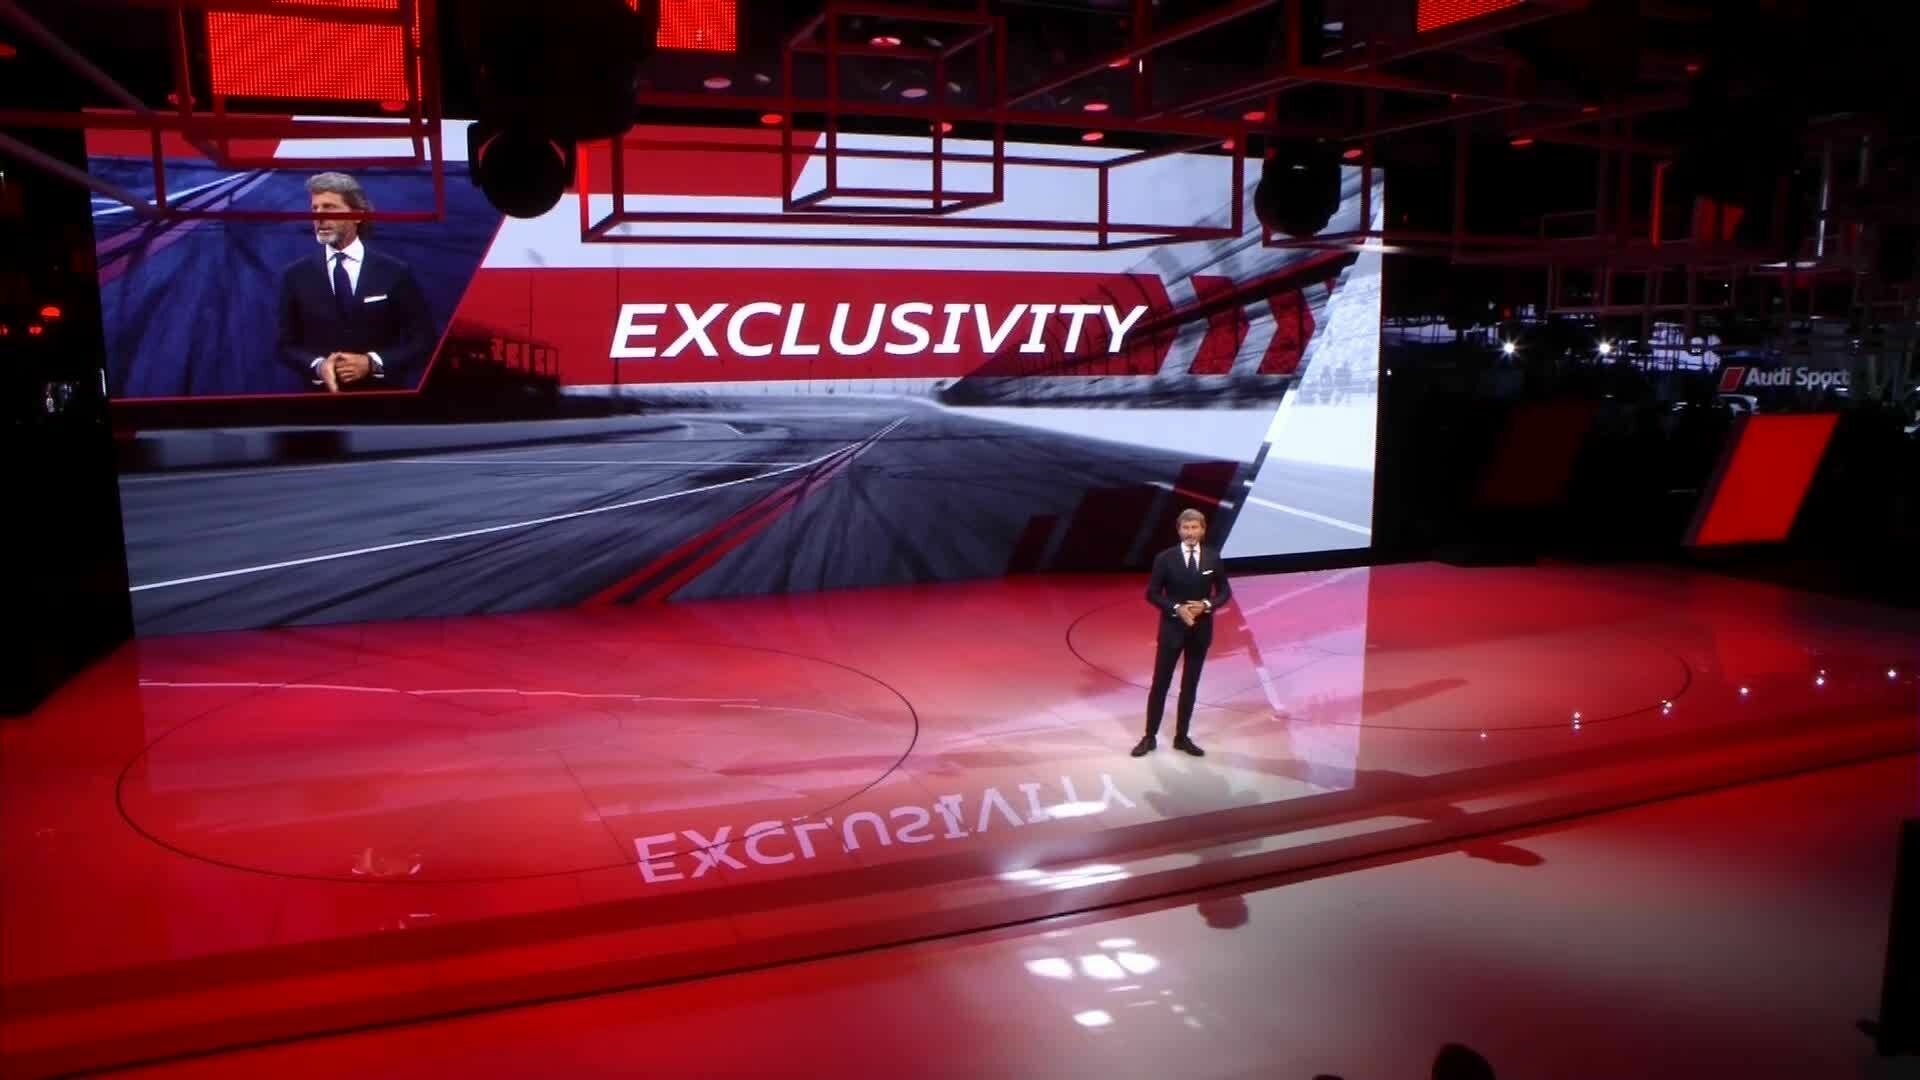 Audi Sport at the Paris Motor Show - The press conference